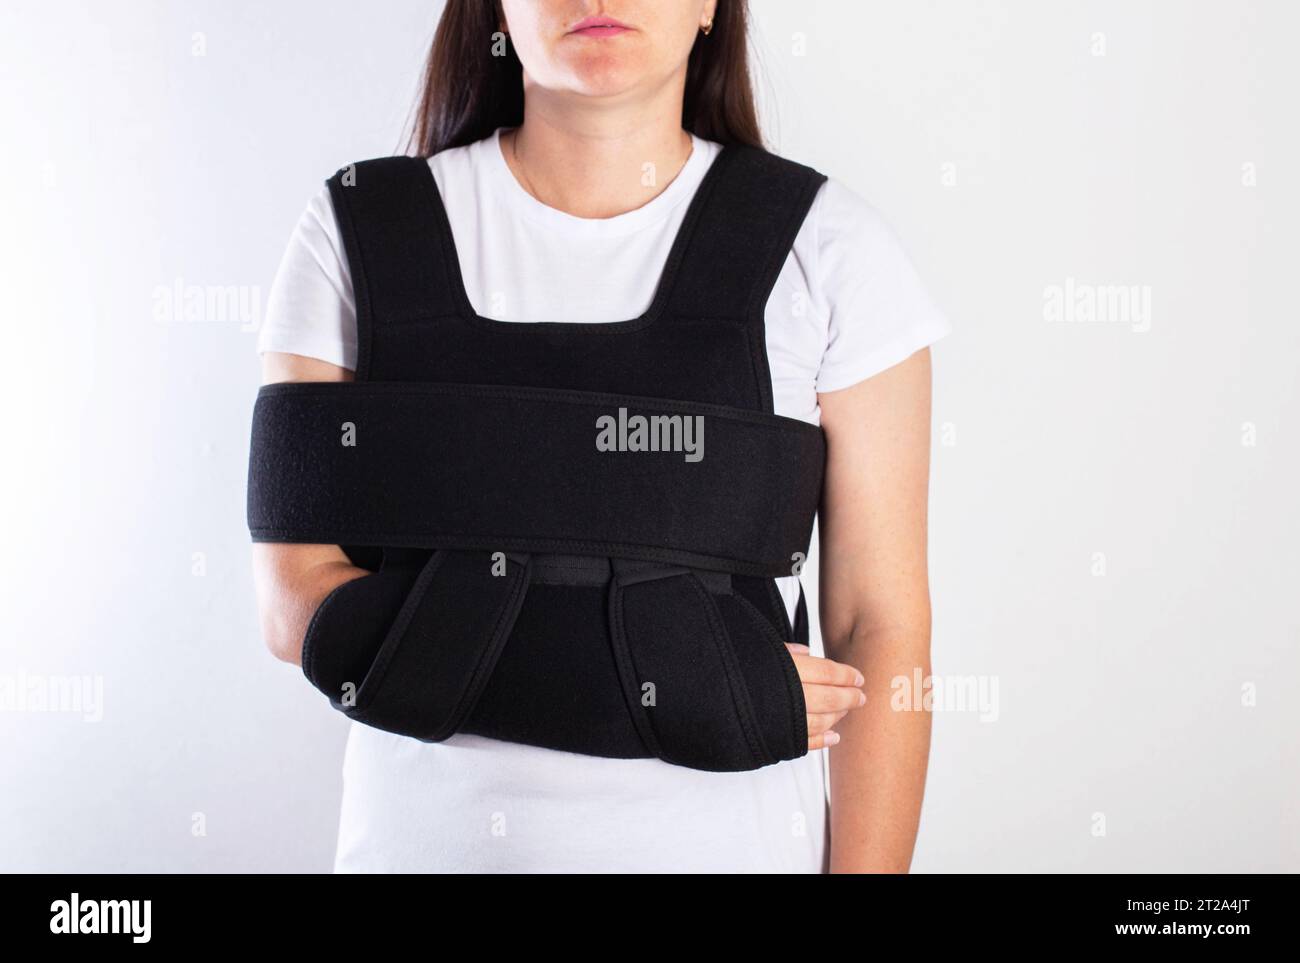 A girl in a medical brace on the shoulder joint for rehabilitation after a collarbone fracture and dislocation. Shoulder sprain. Stock Photo